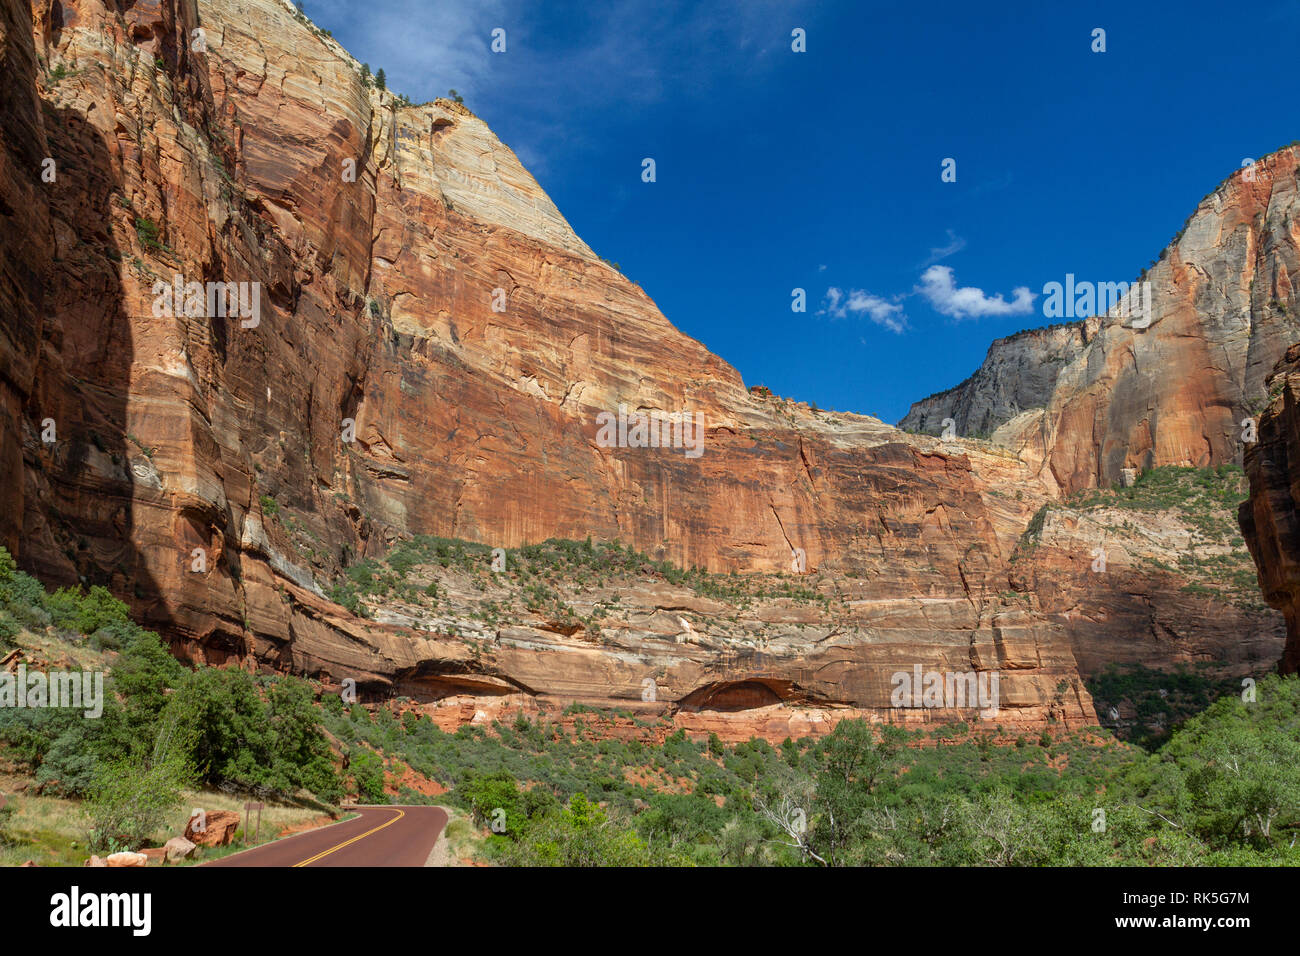 The Big Bend viewpoint, Zion National Park, Springdale, Utah, United States. Stock Photo